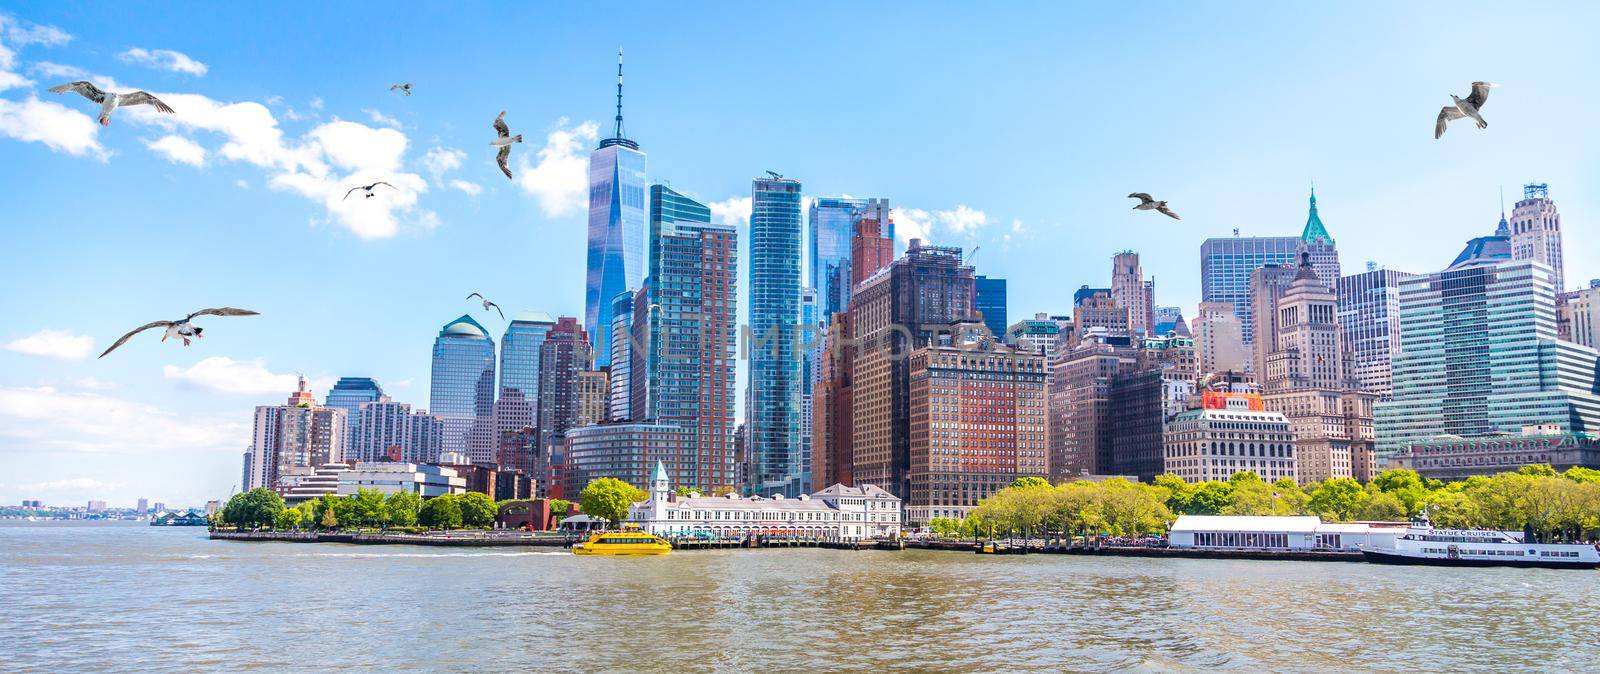 Skyline panorama of downtown Financial District and Lower Manhattan in New York City , USA with seagulls on foreground by Mariakray